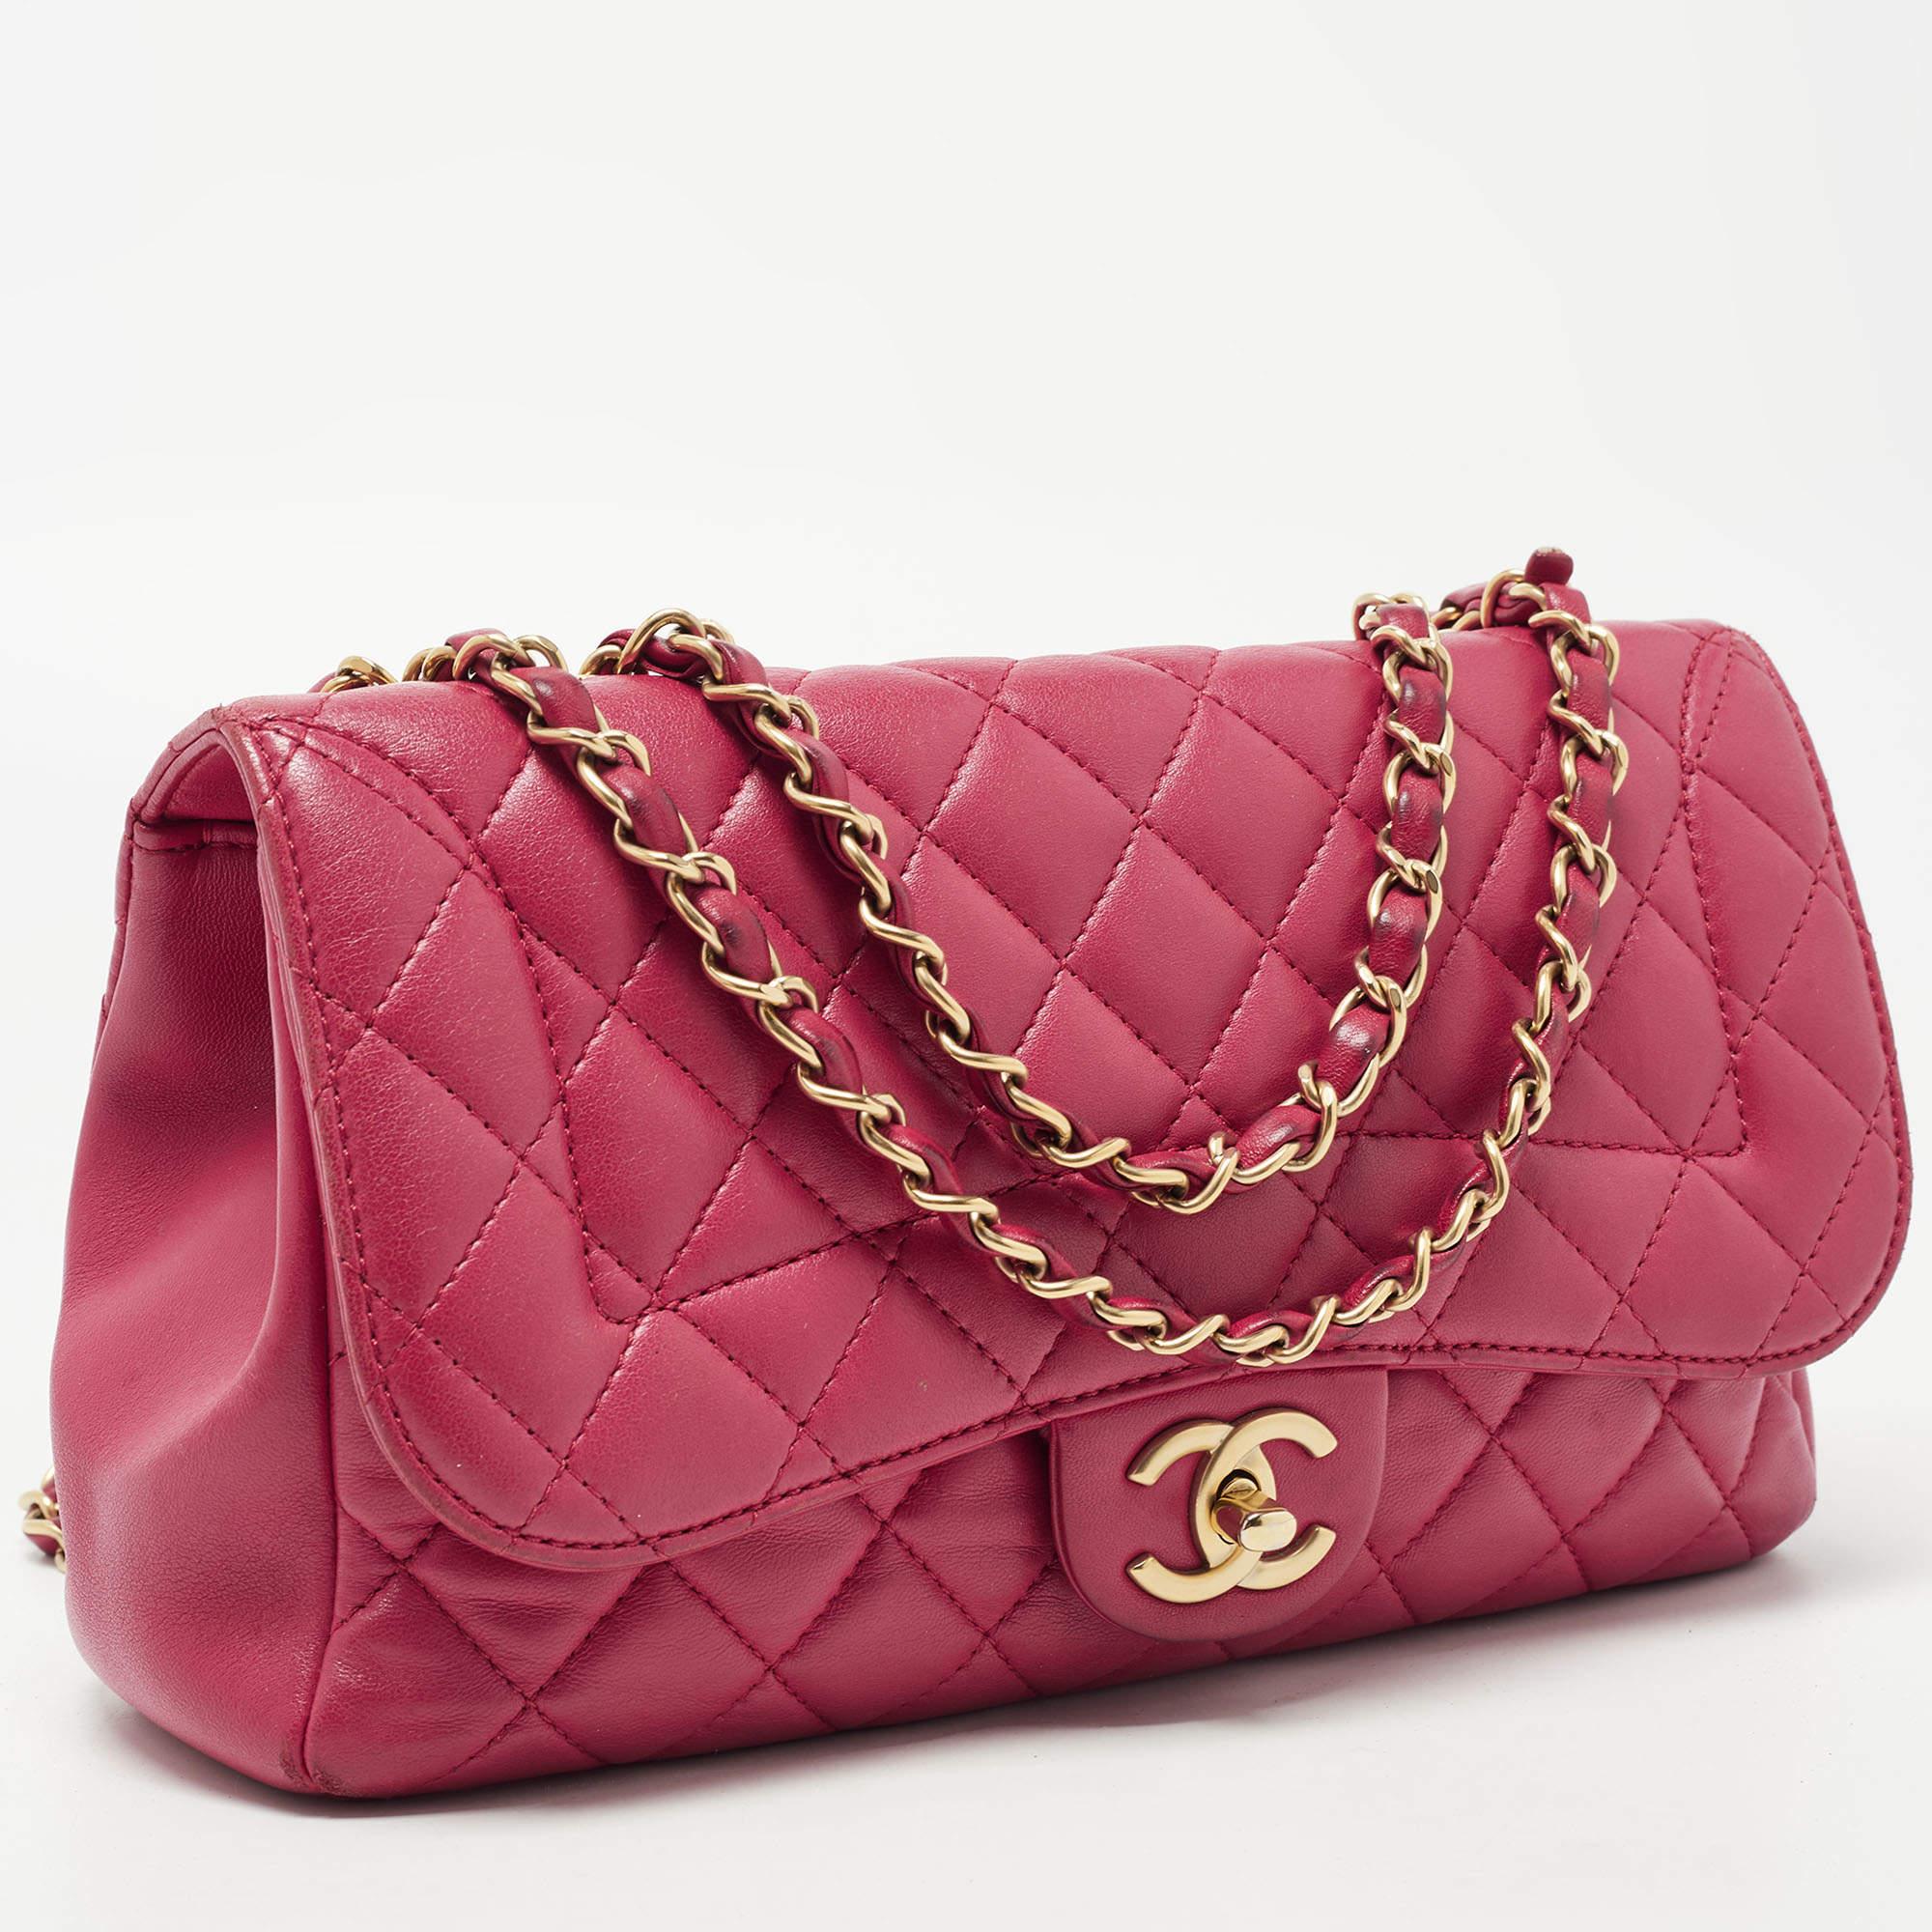 Women's Chanel Red Quilted Leather Medium Mademoiselle Chic Flap Bag